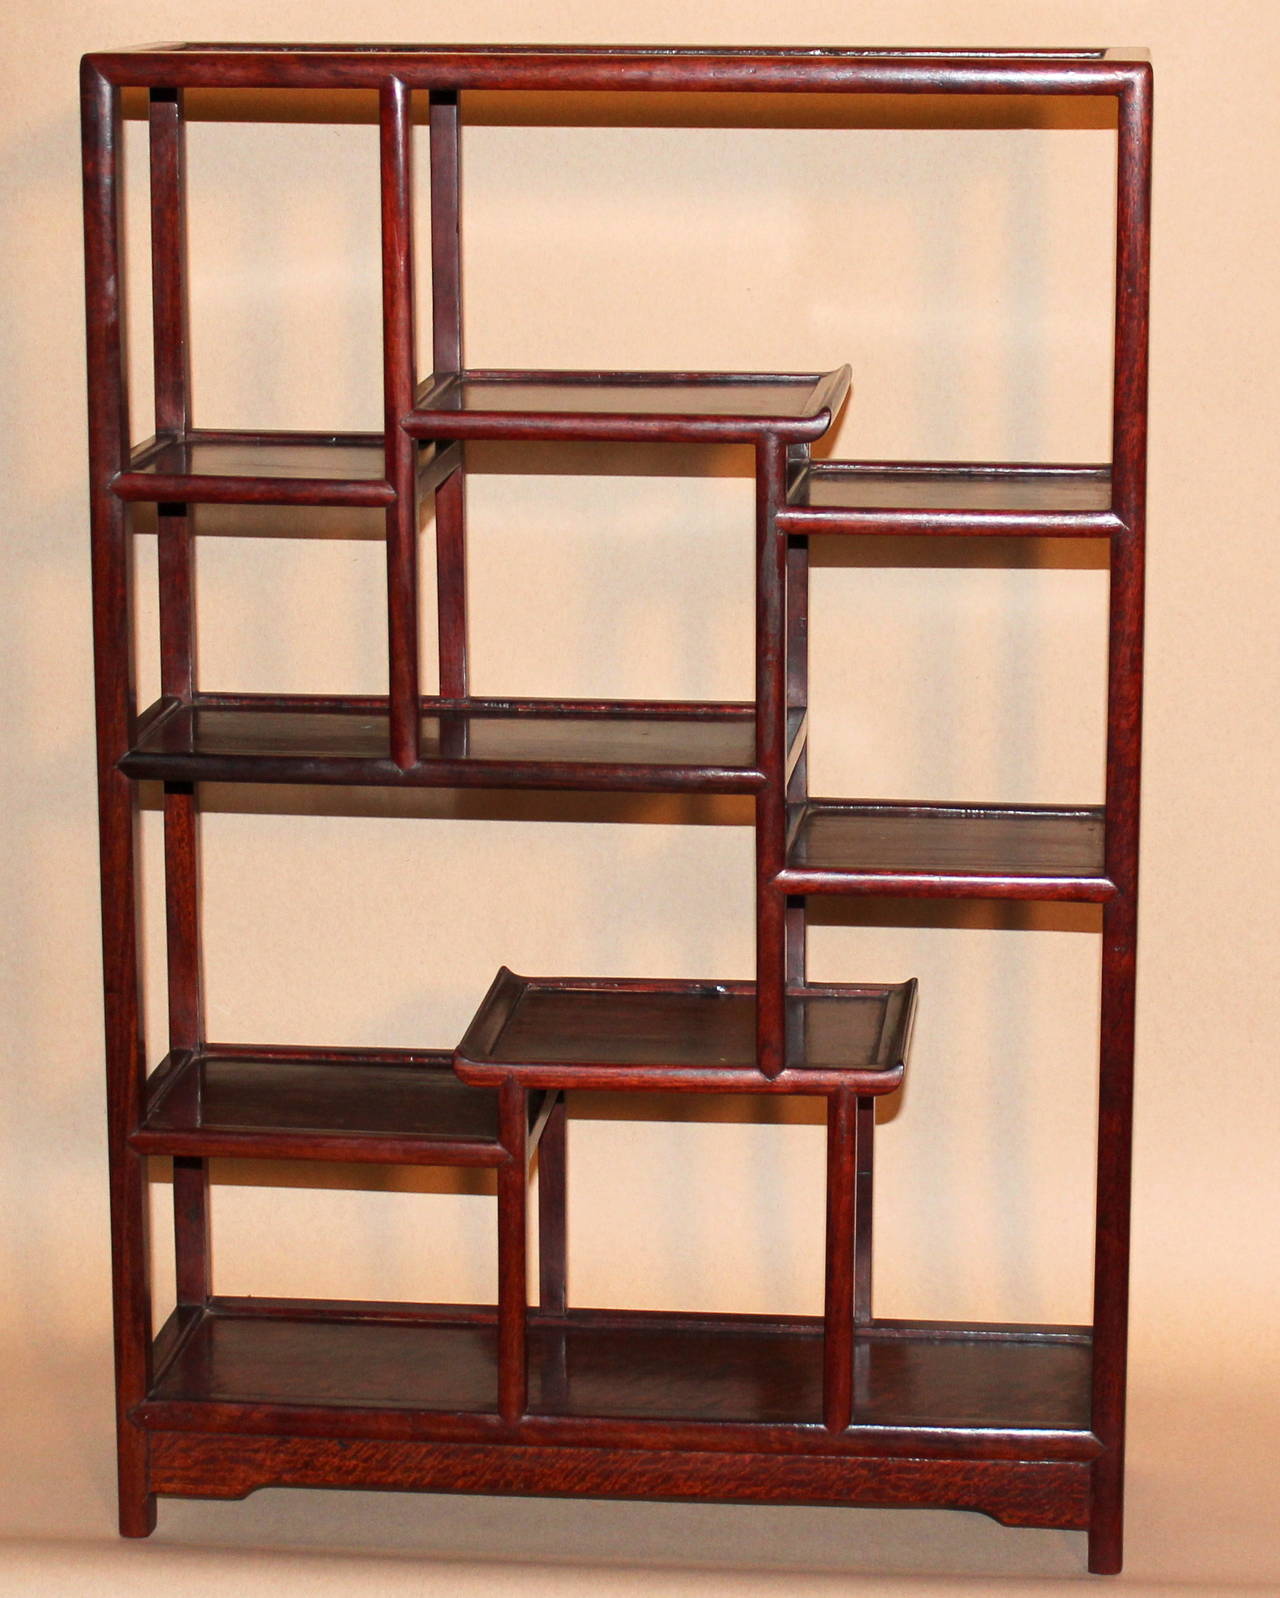 Nice quality vintage Chinese rosewood tabletop display shelf, circa mid/late 20th century. Stands straight and sturdy. 26